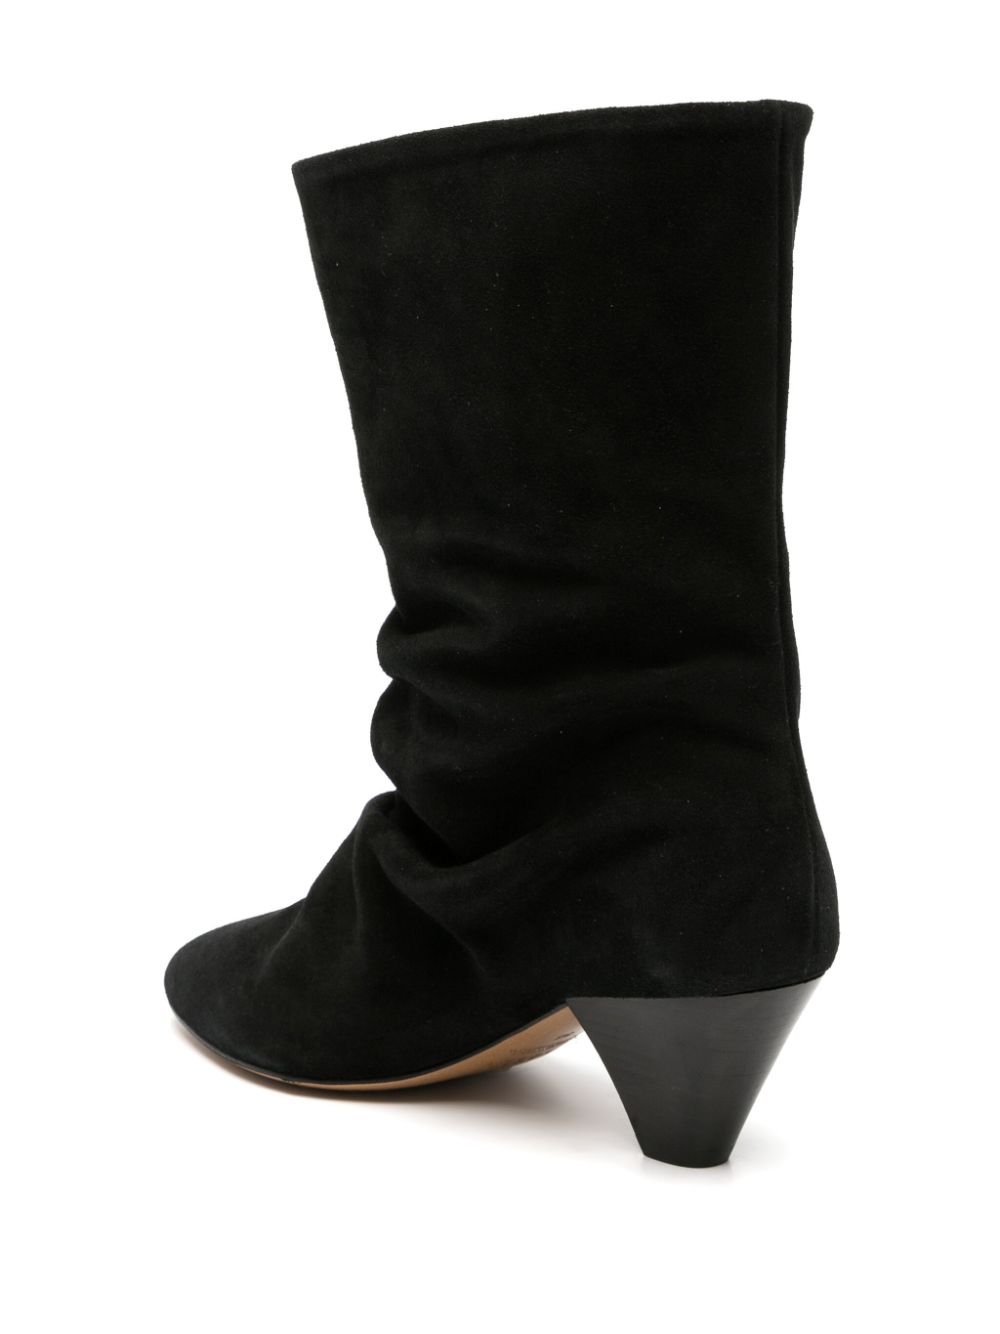 ISABEL MARANT Black Almond Toe Slip-On Leather Boots for Women